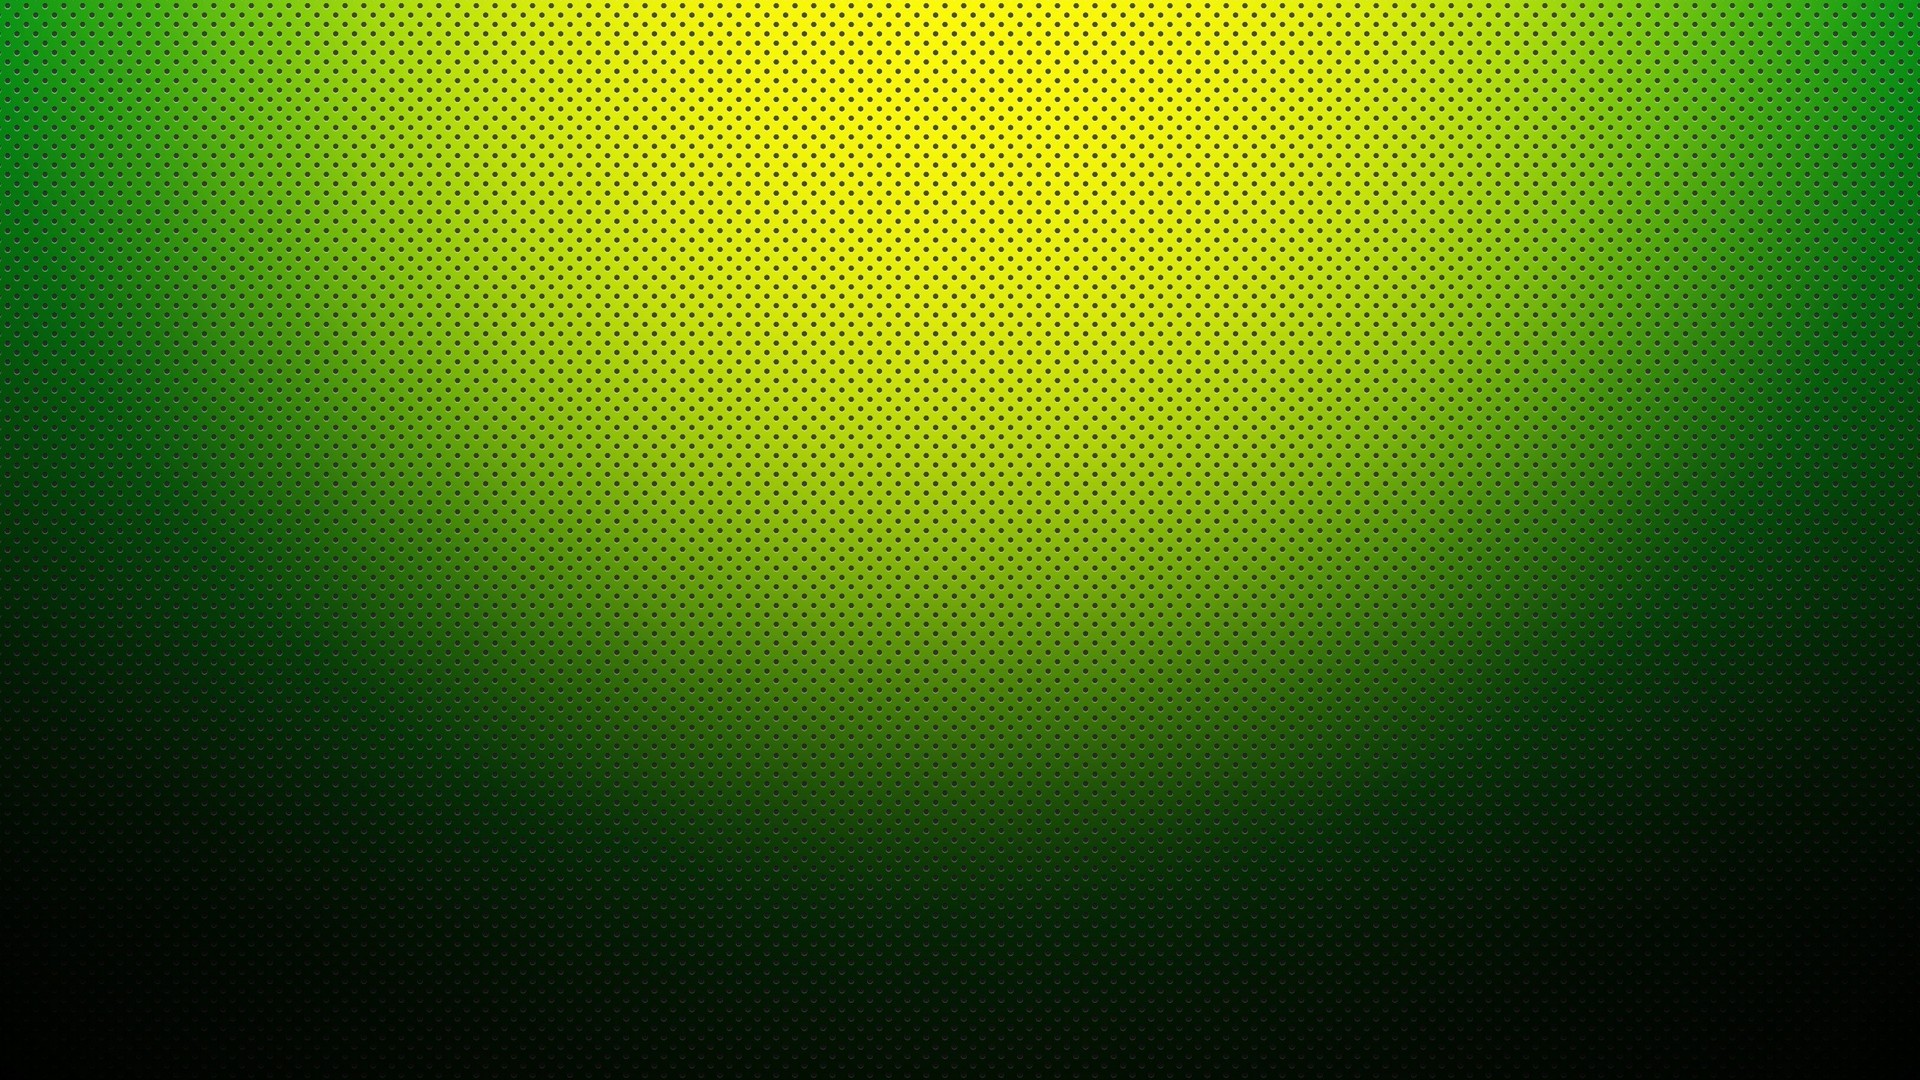 Lime Green Desktop Backgrounds with image resolution 1920x1080 pixel. You can make this wallpaper for your Desktop Computer Backgrounds, Mac Wallpapers, Android Lock screen or iPhone Screensavers